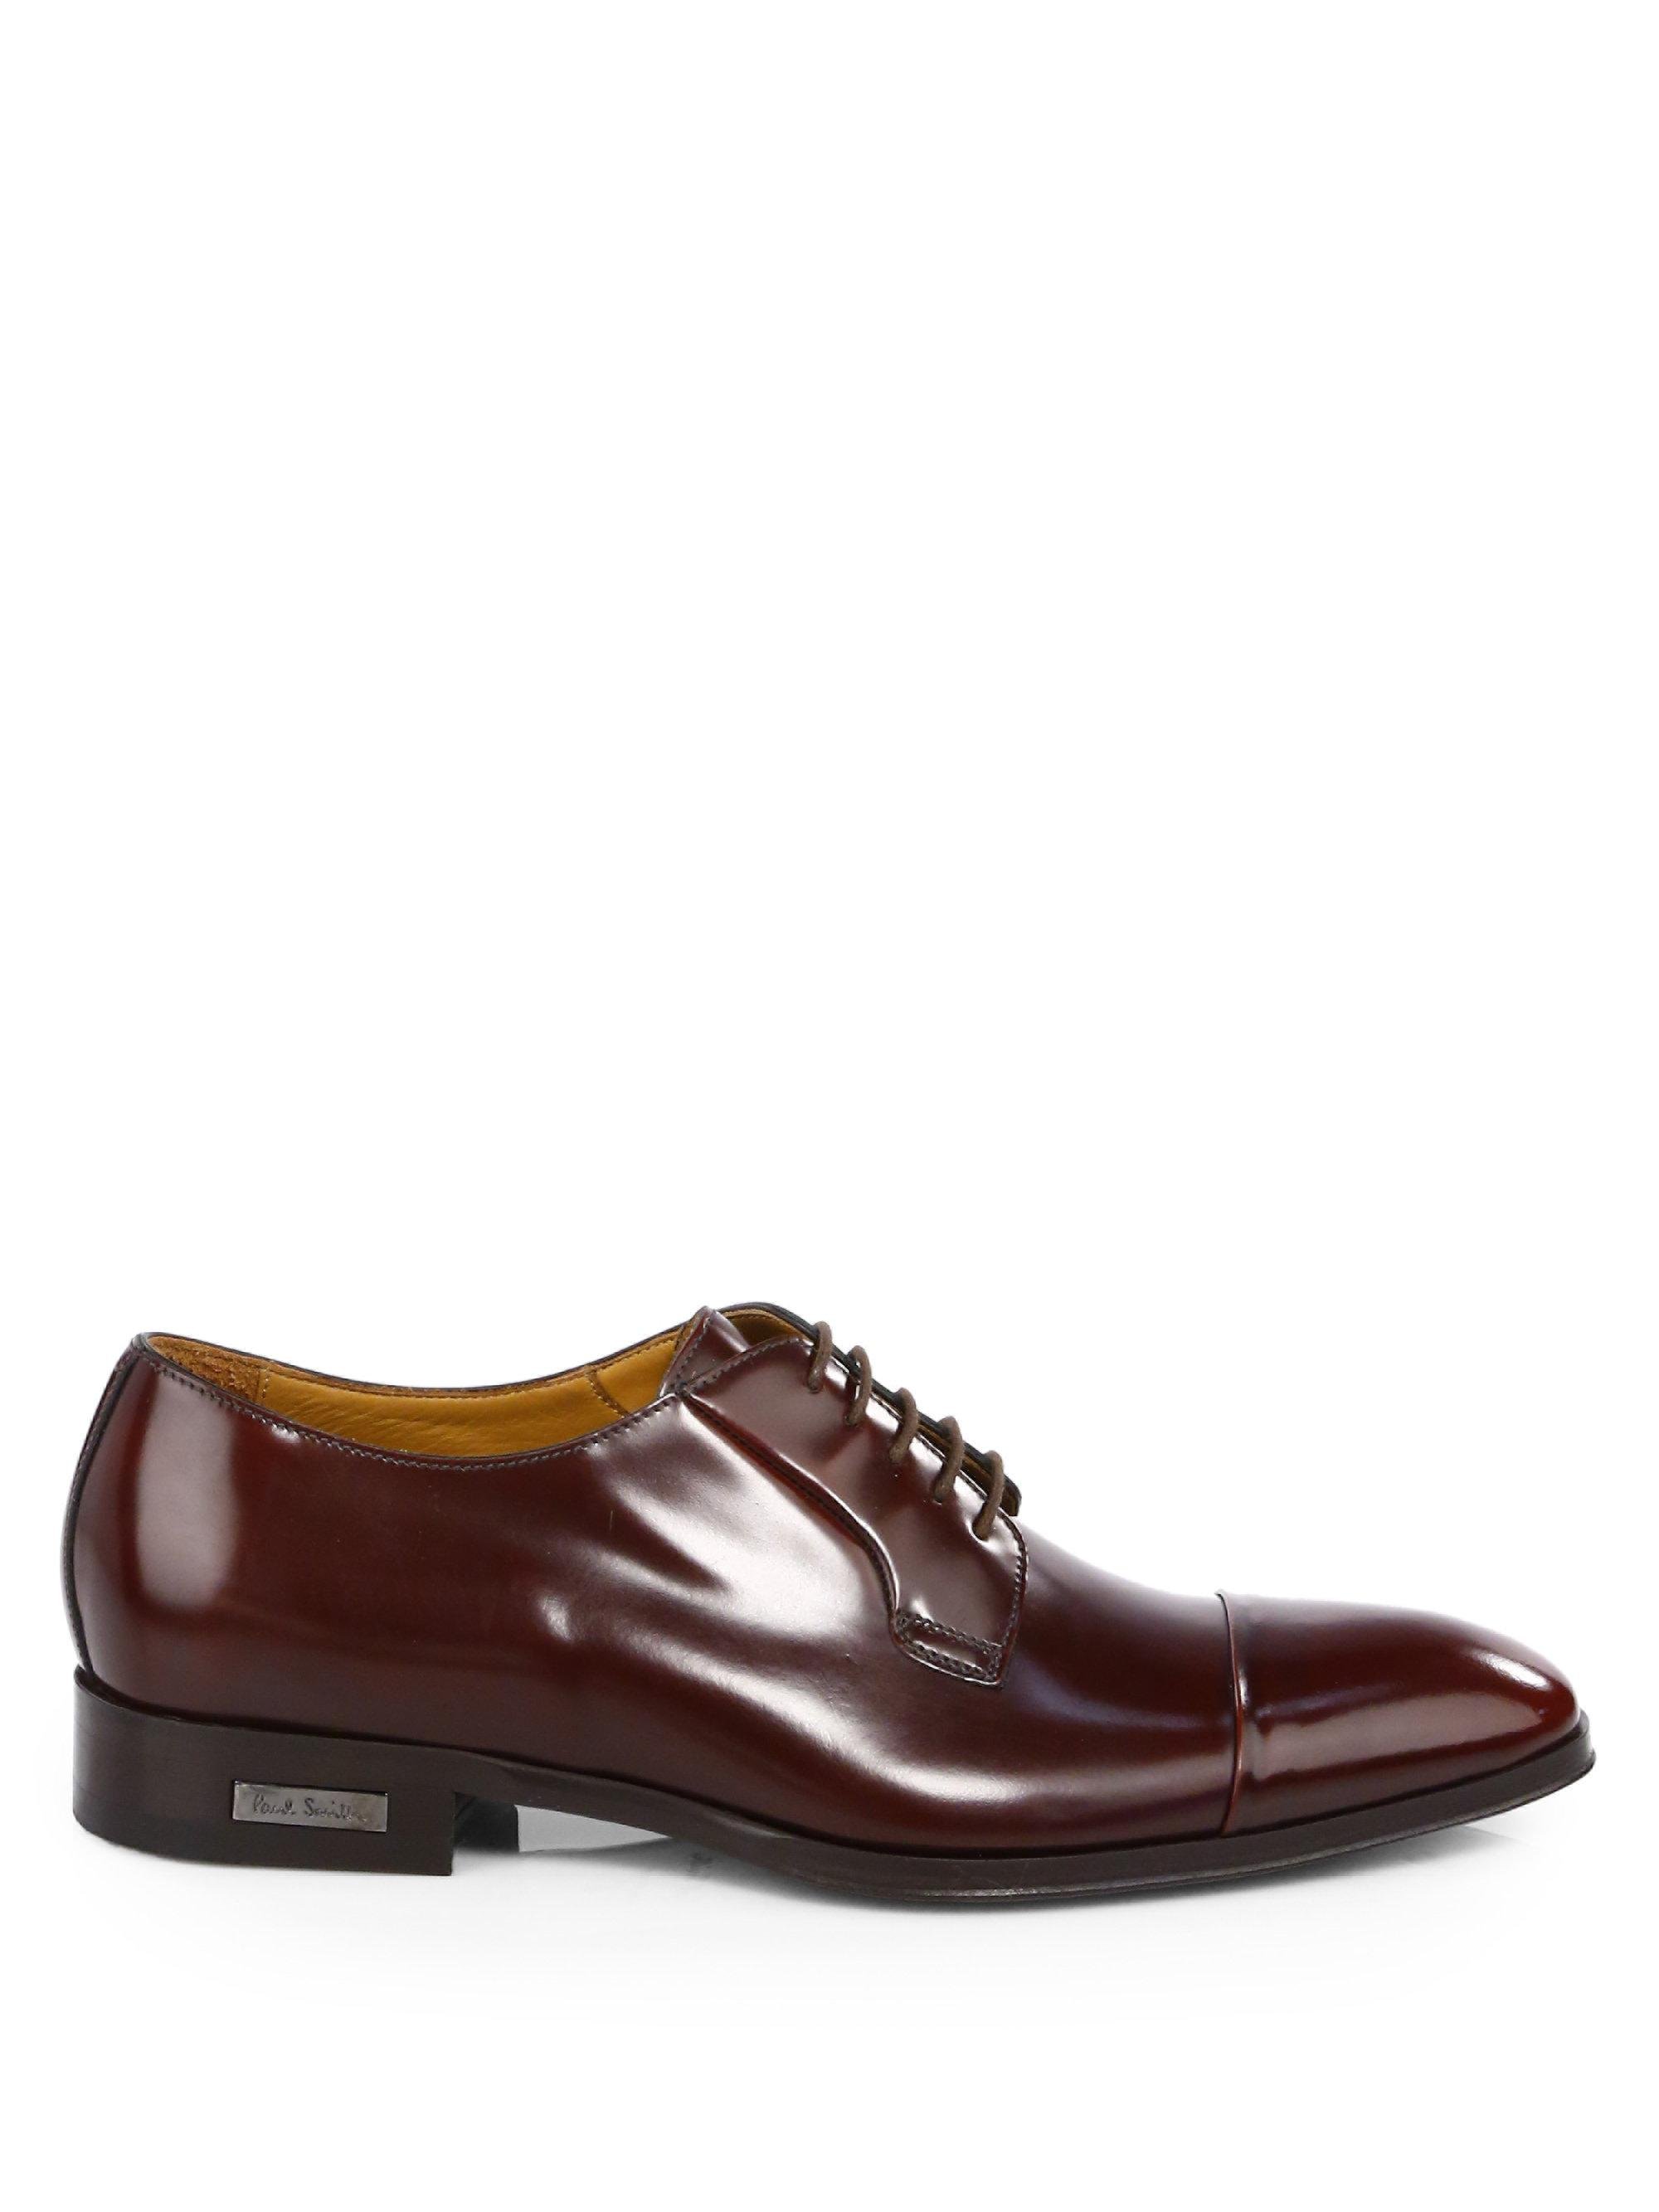 Paul Smith Spencer Patent Leather Dress Shoes in Burgundy (Brown) for ...